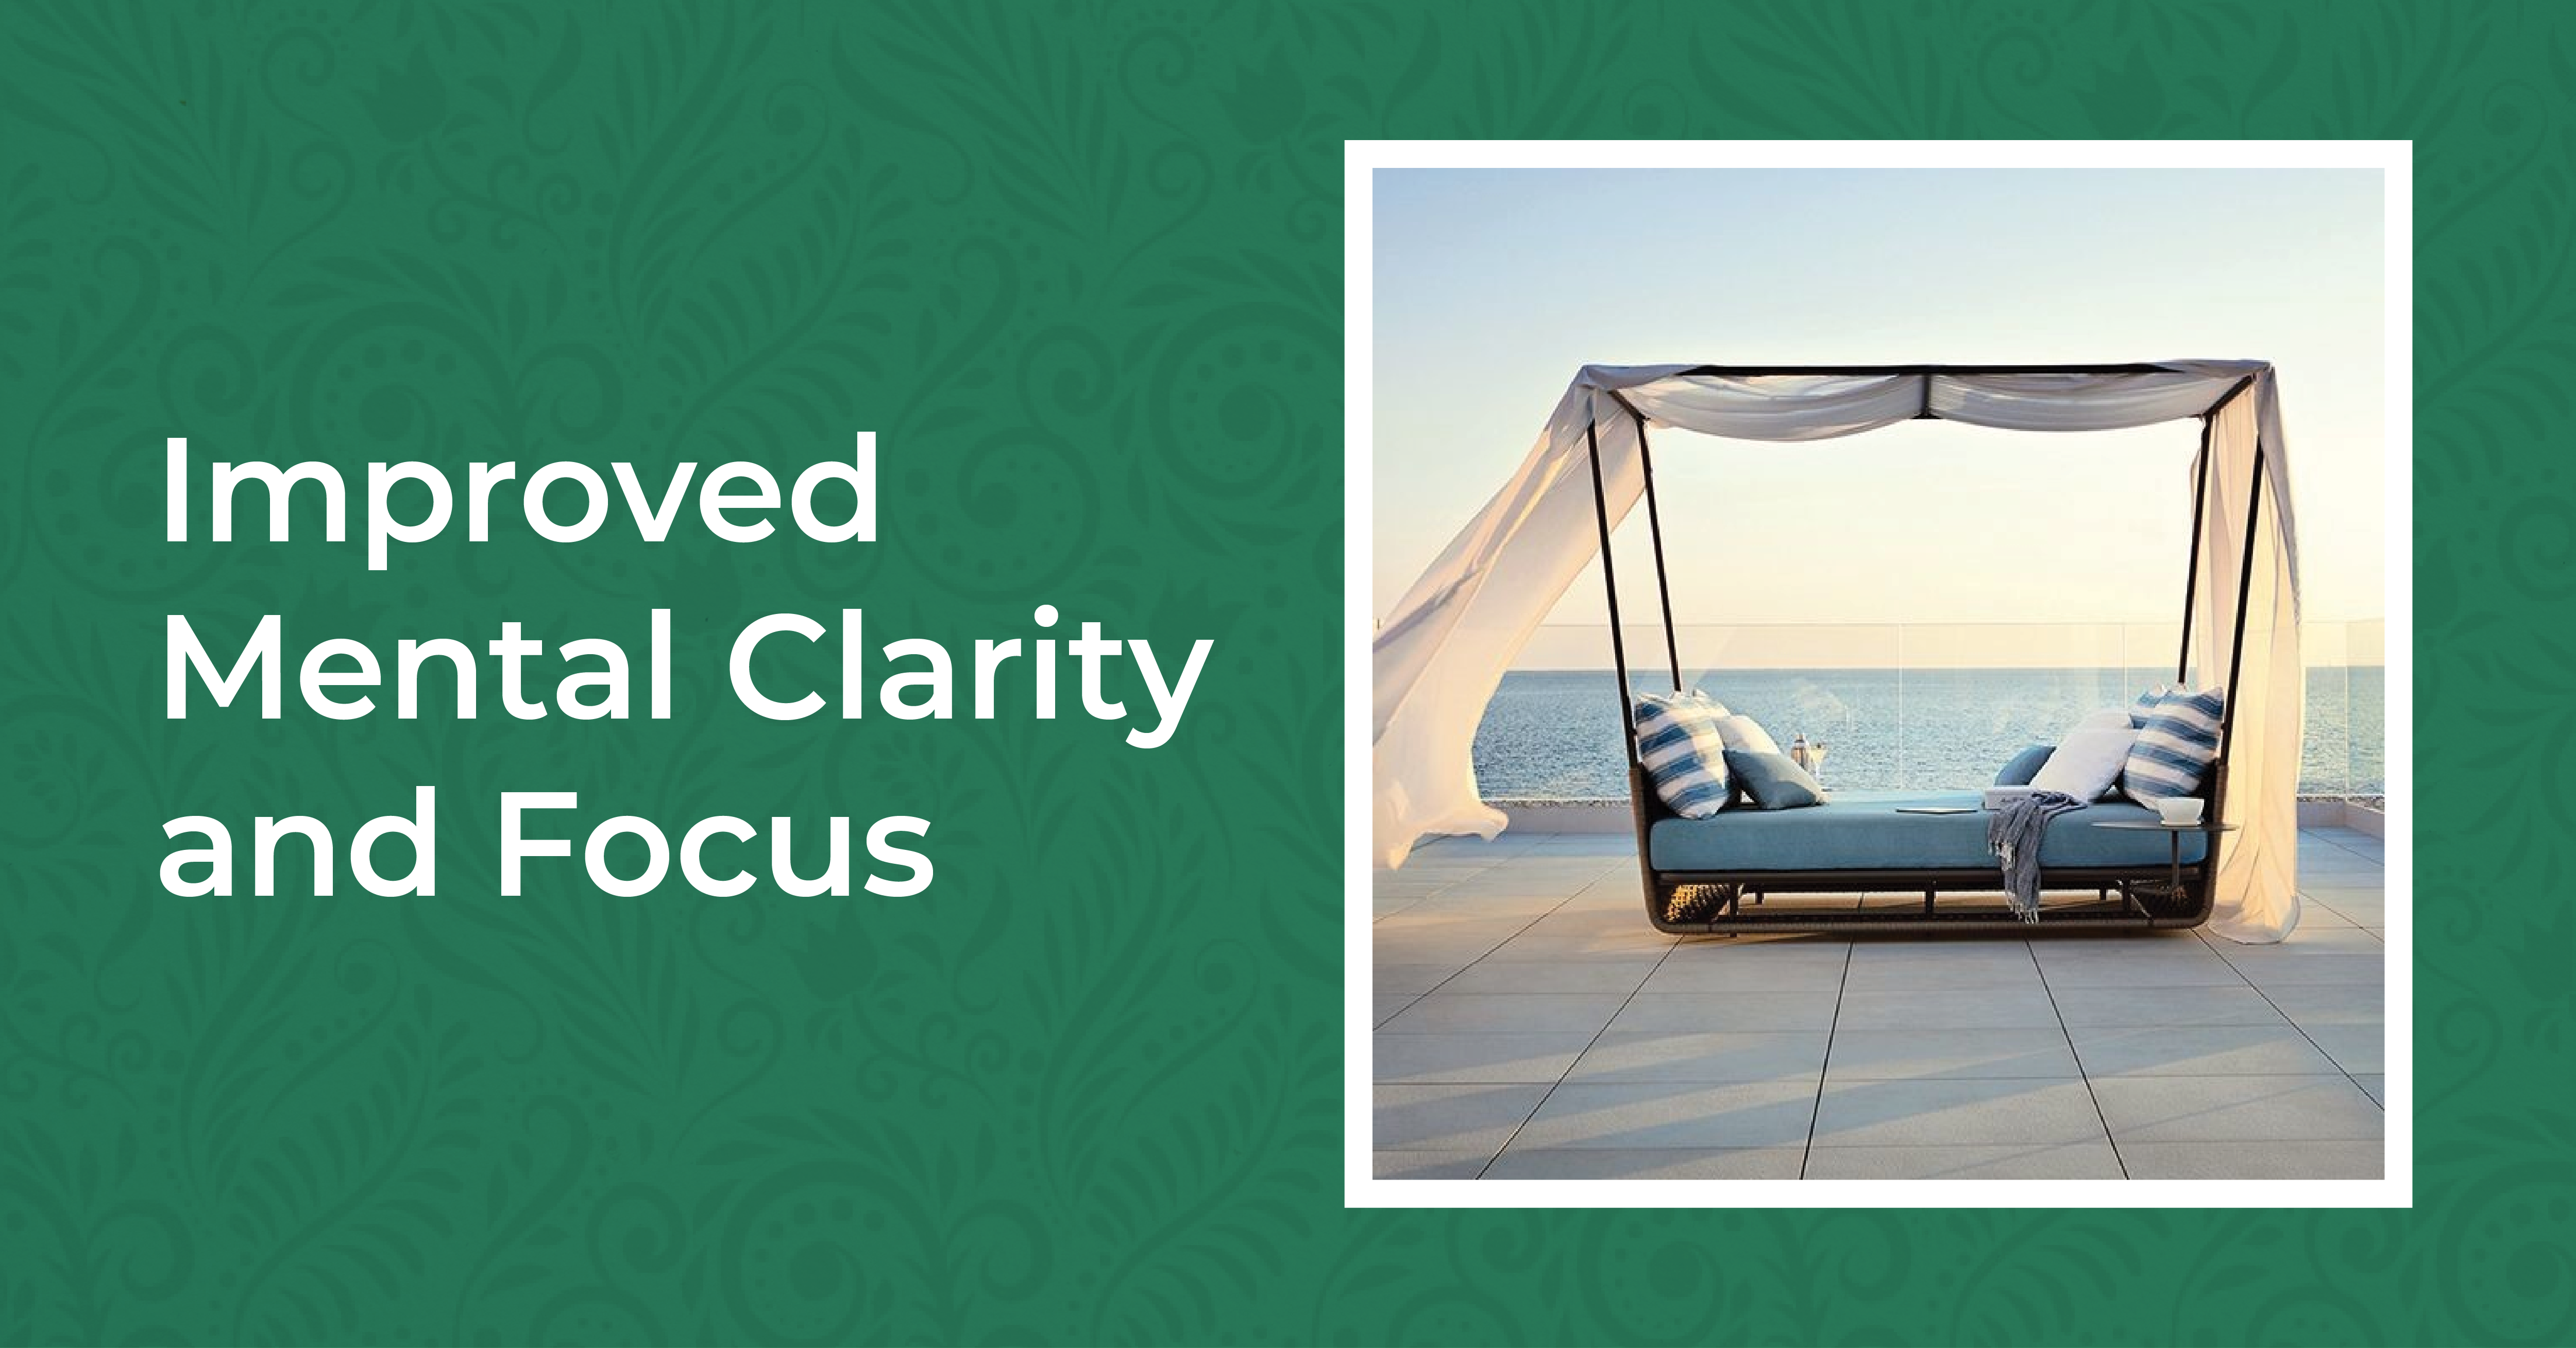 Improved Mental Clarity and Focus